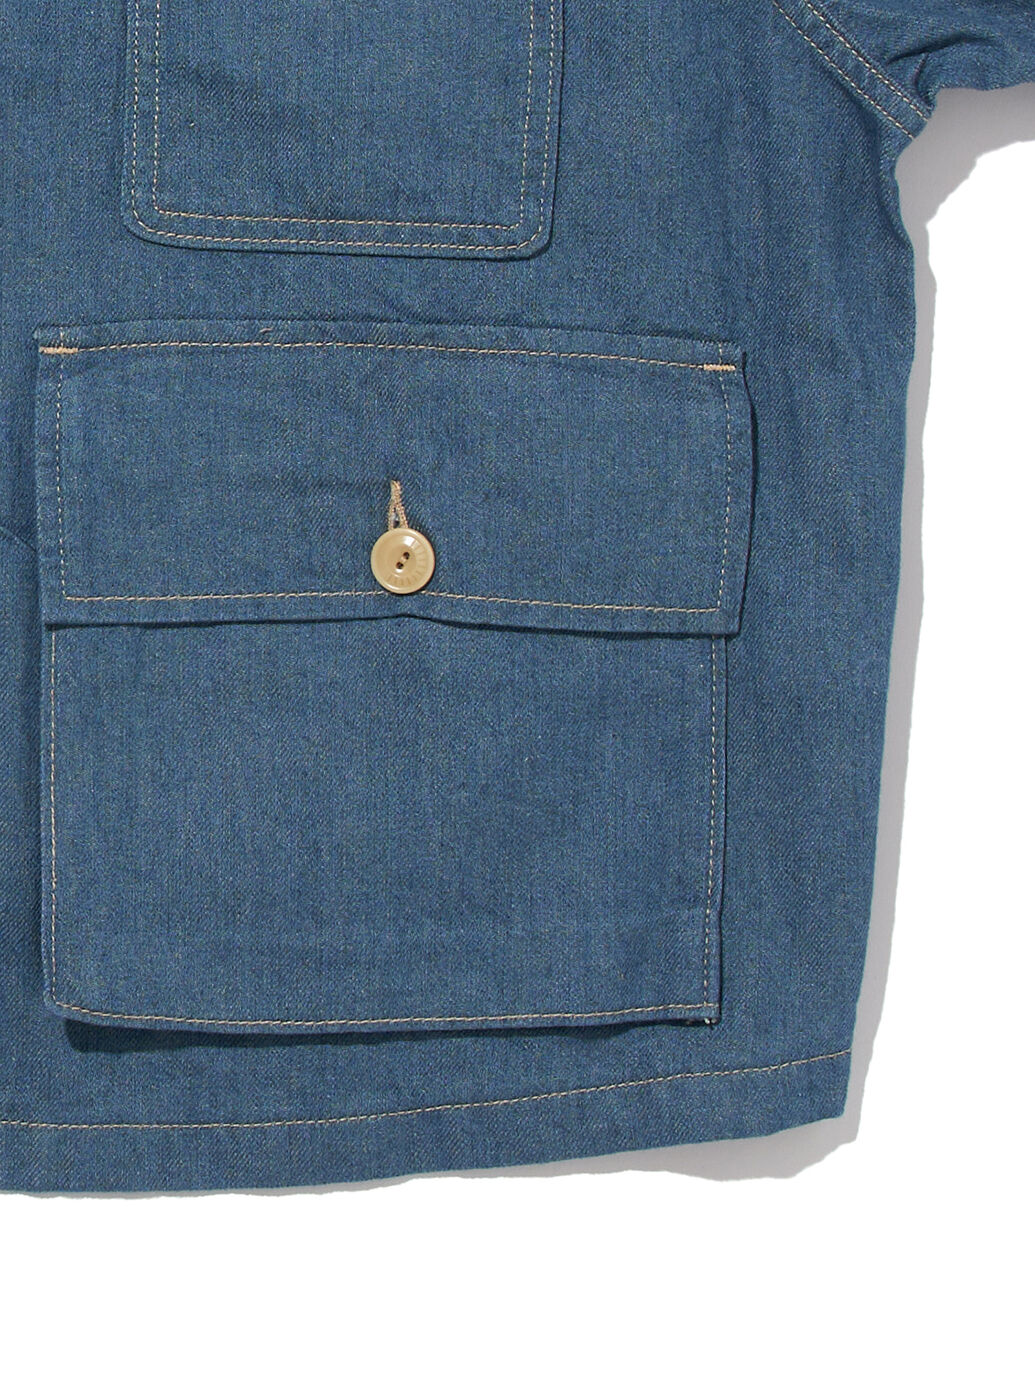 LEVI'S® MADE&CRAFTED® DENIM FAMILY クロップドジャケット SPRING 